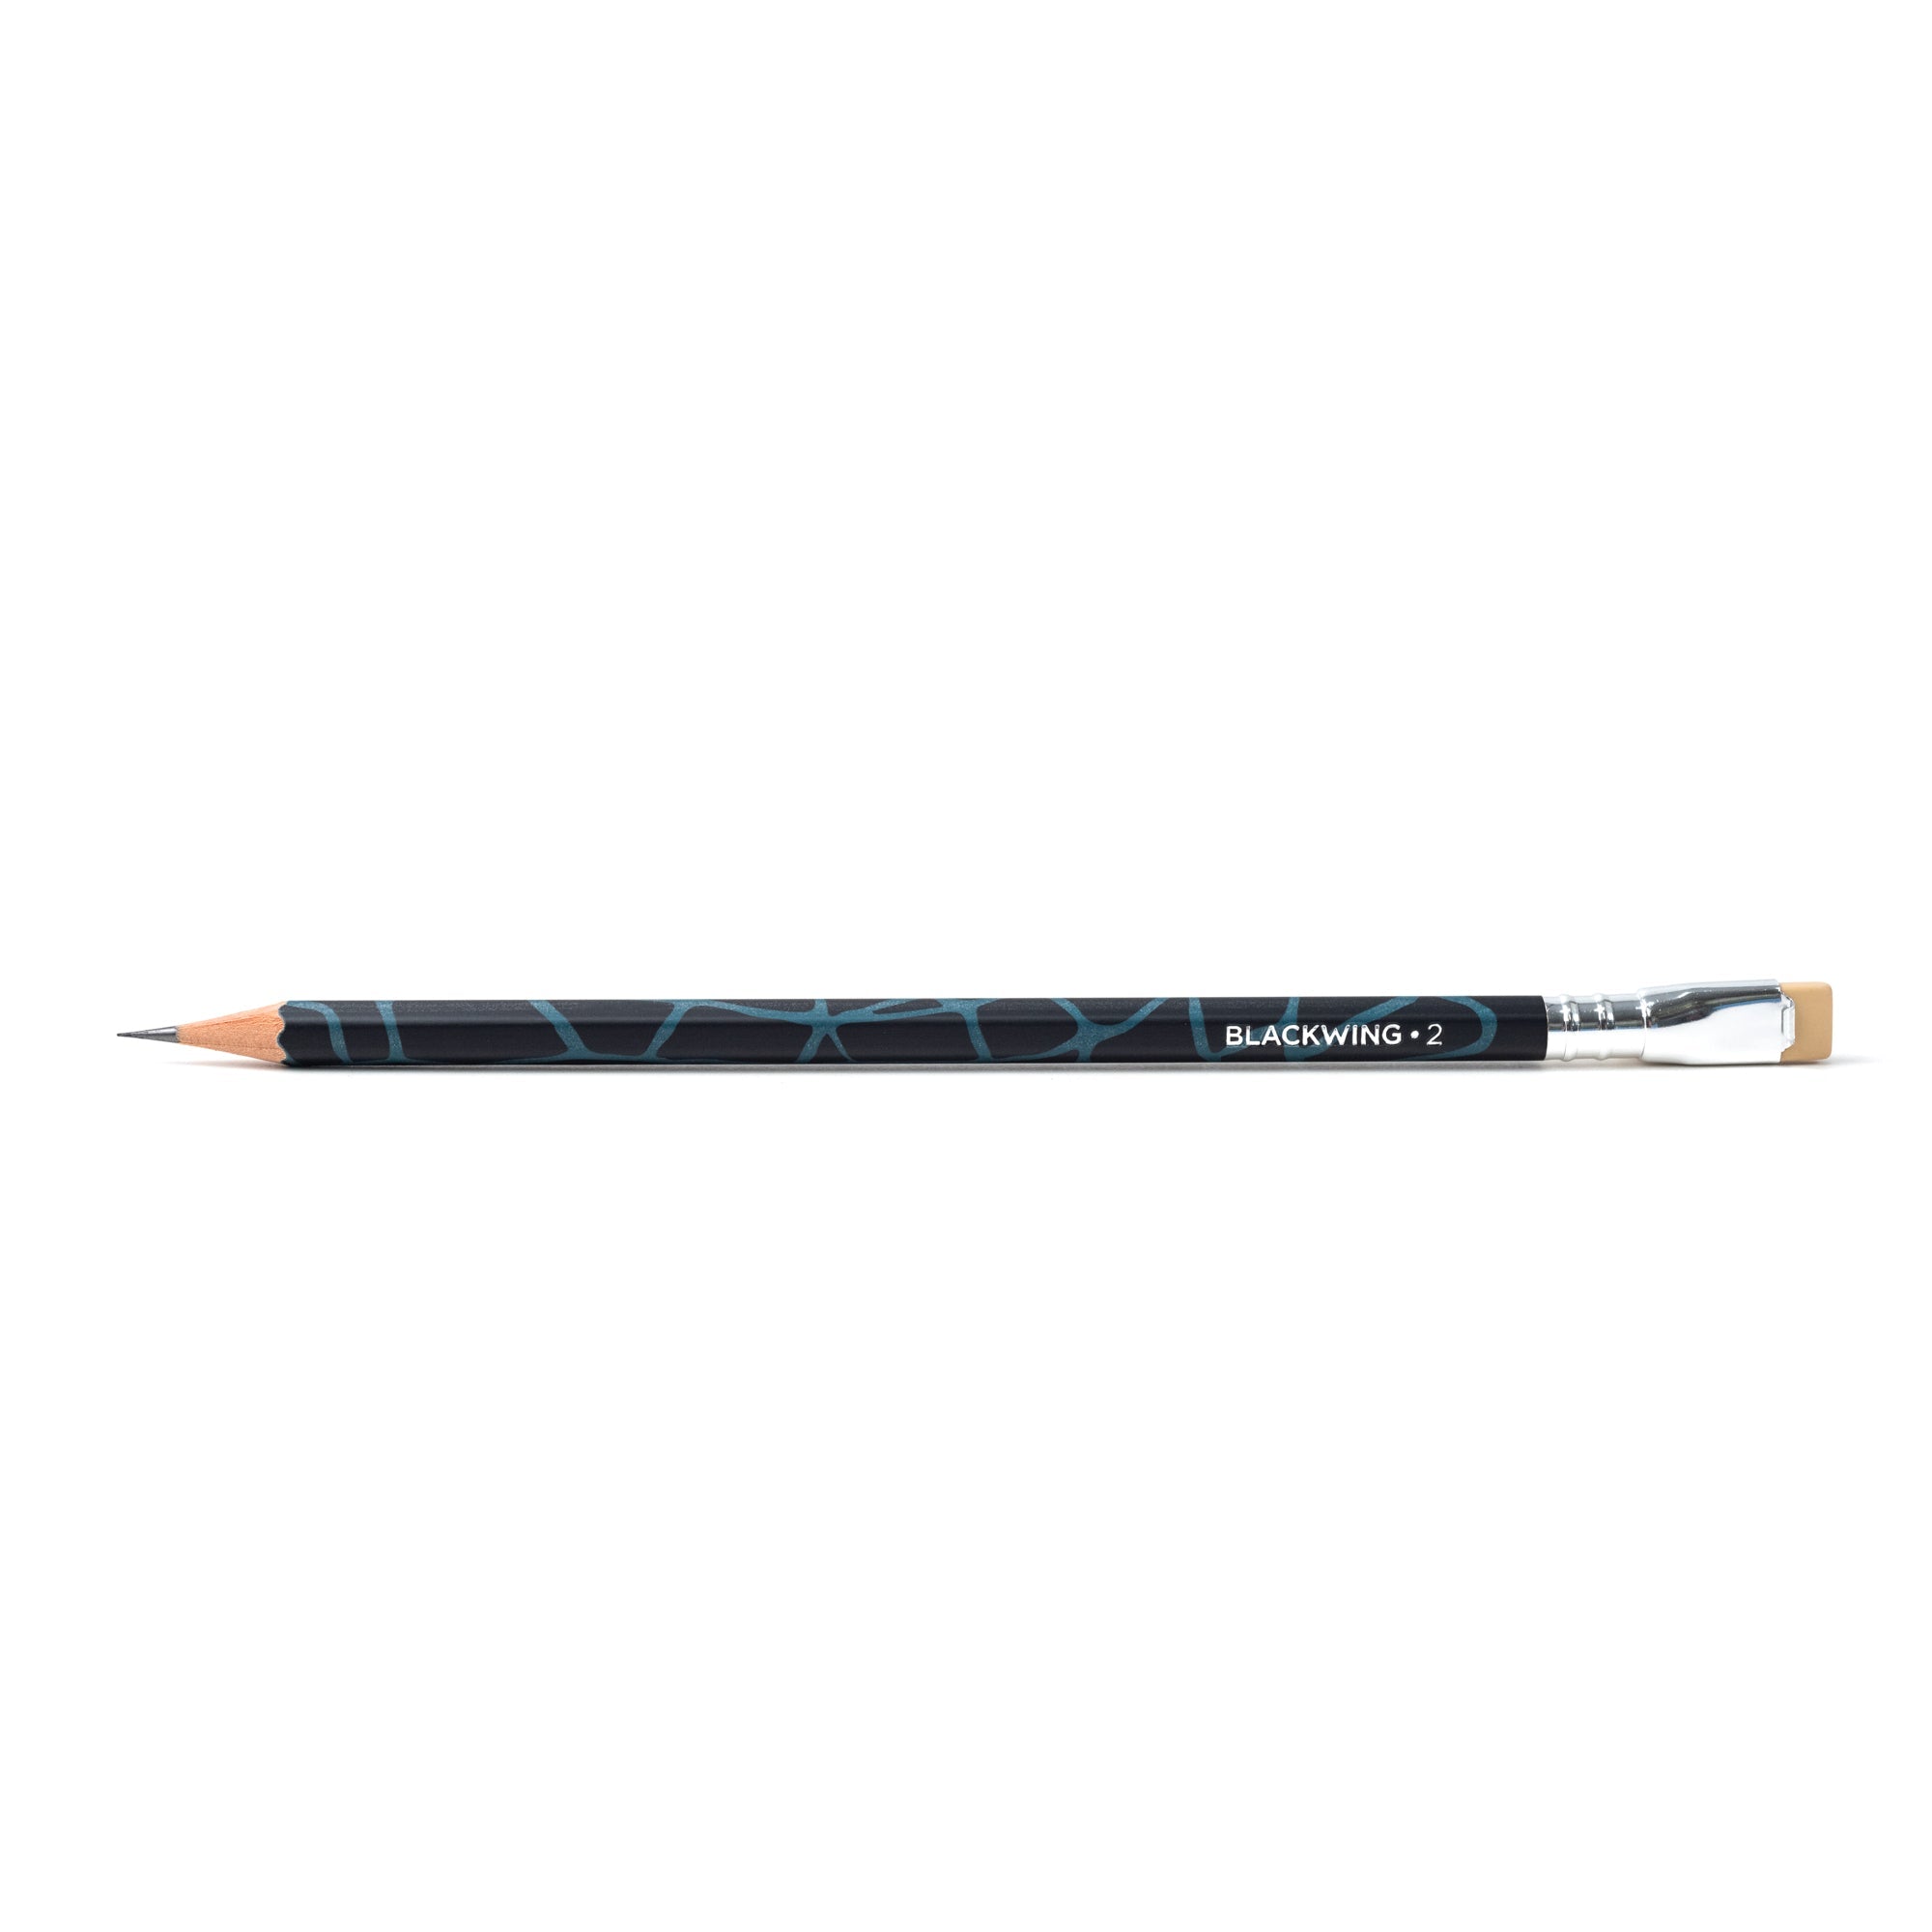 Blackwing Volume 2 limited edition